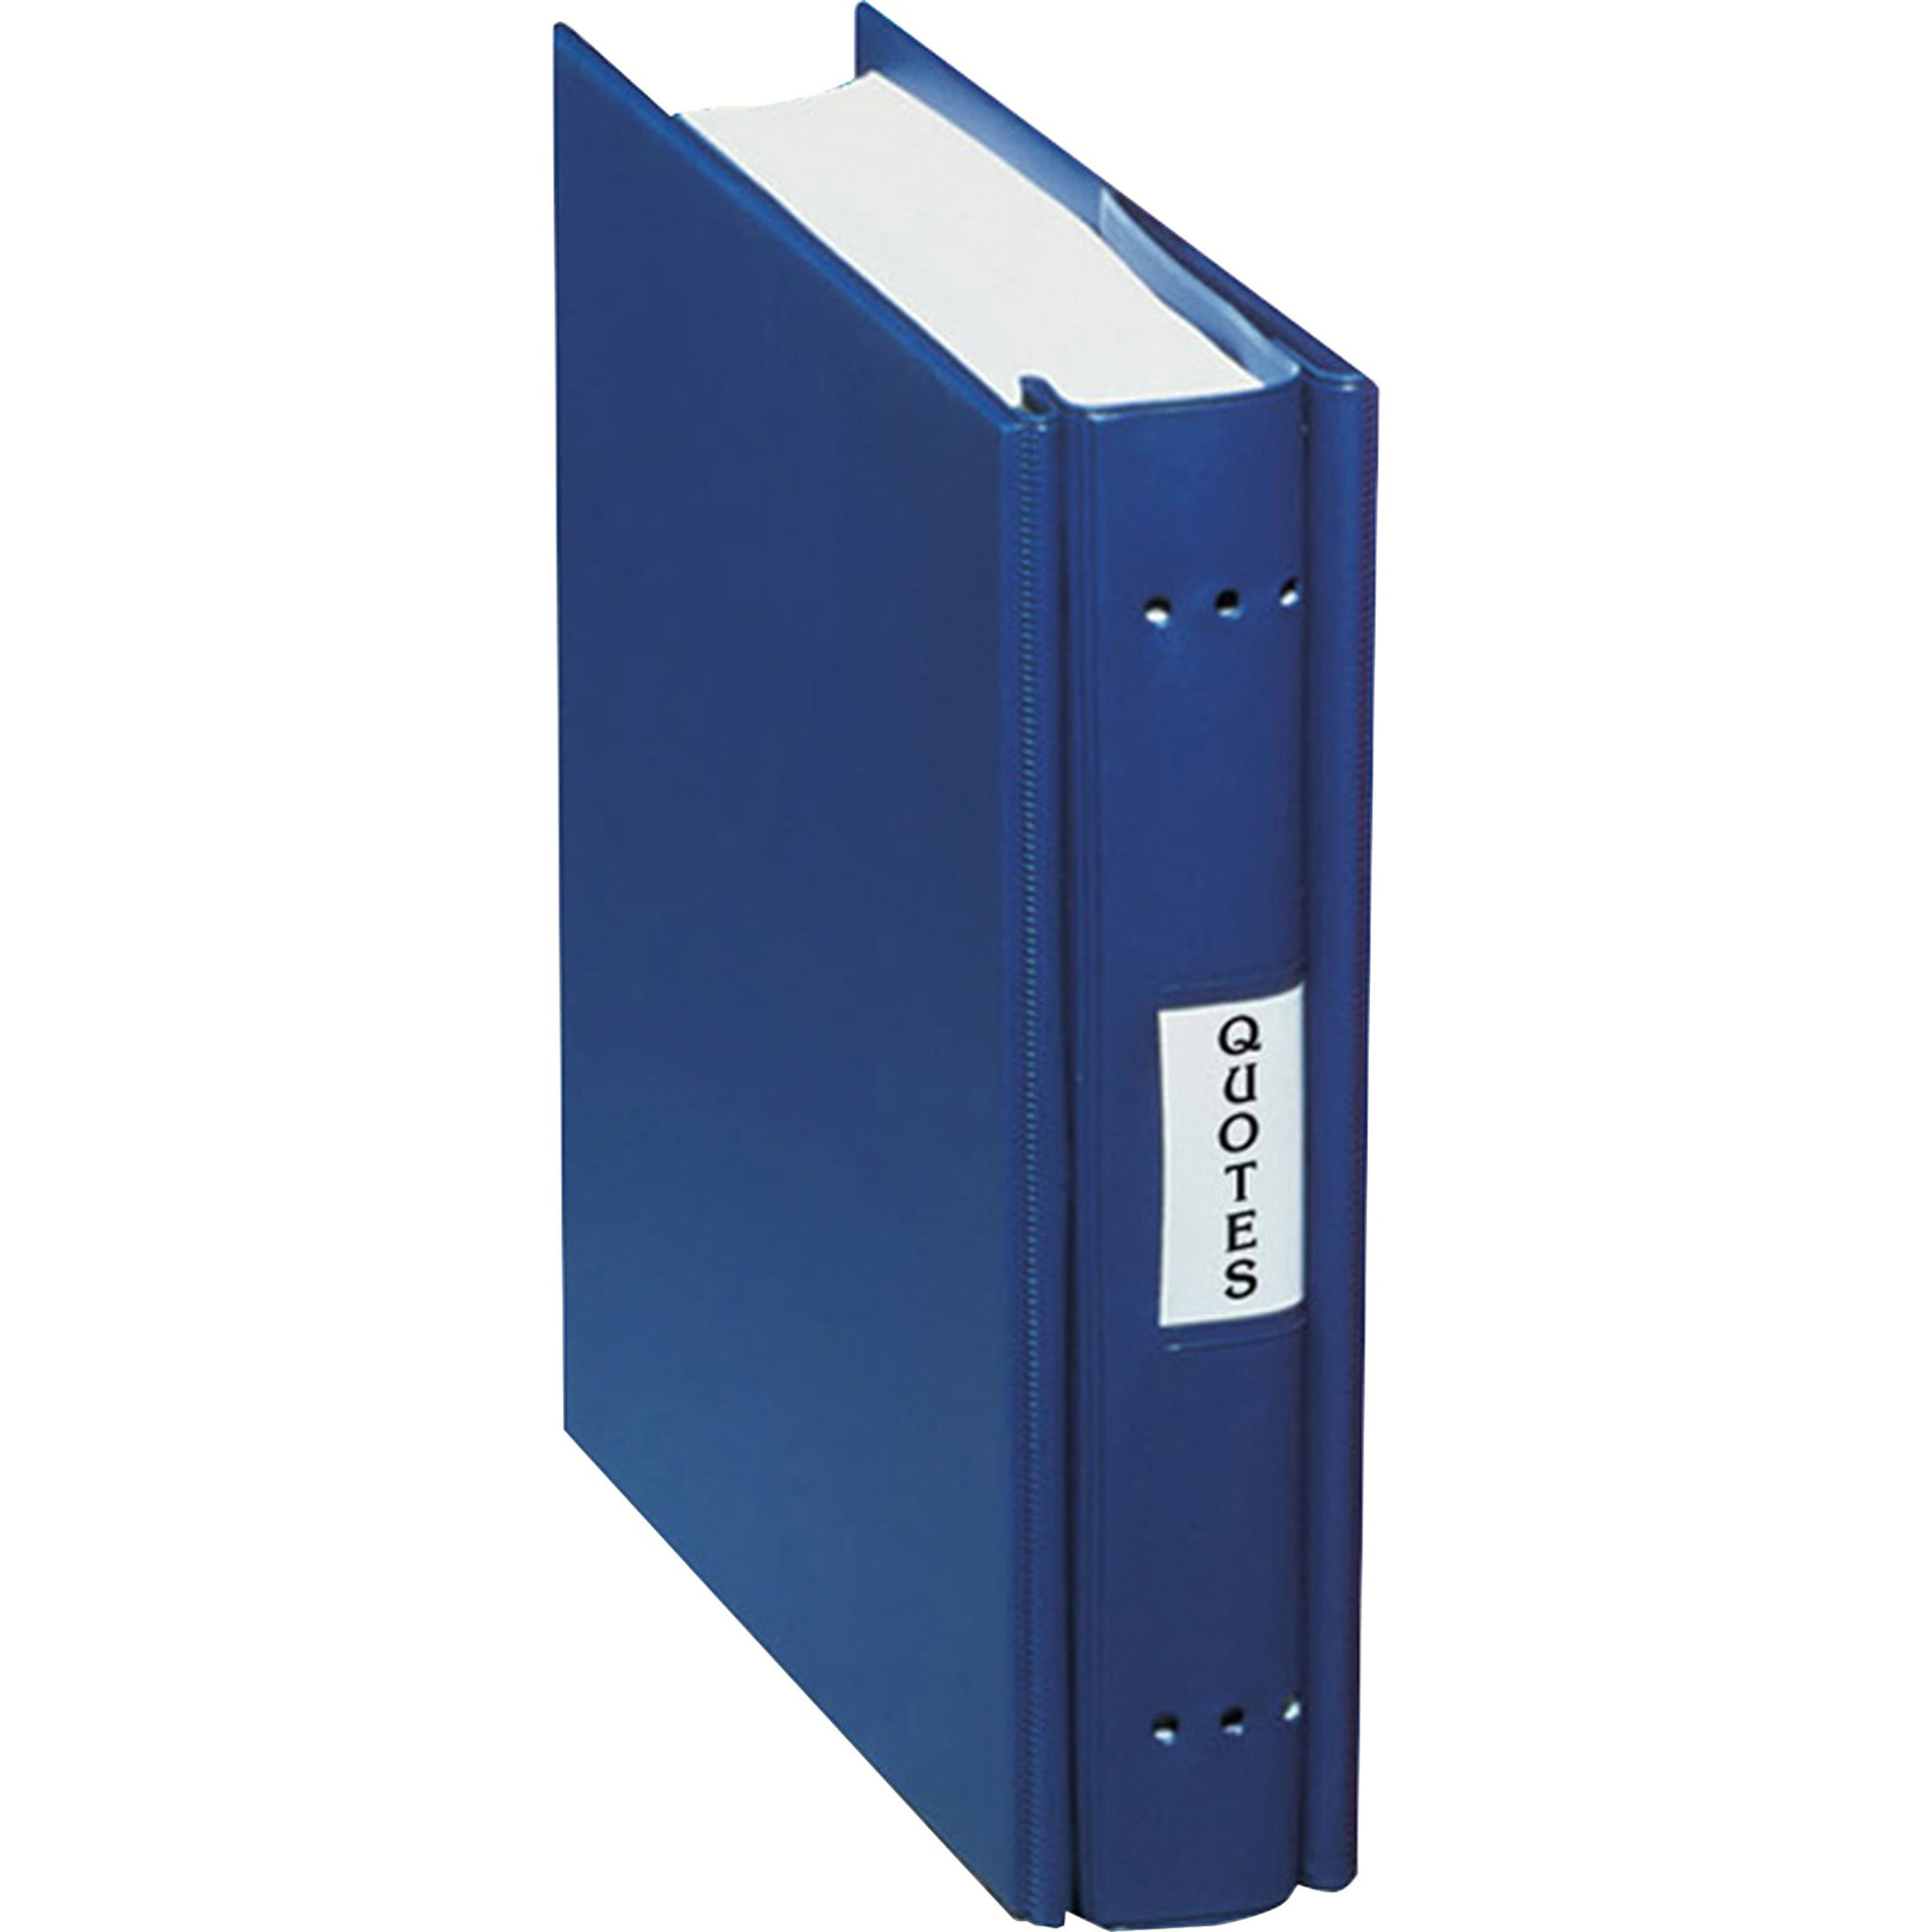 BRAND NEW QUALITY BLUE A4 SIZE RING BINDER RINGBINDER FILE HIGH QUALITY 